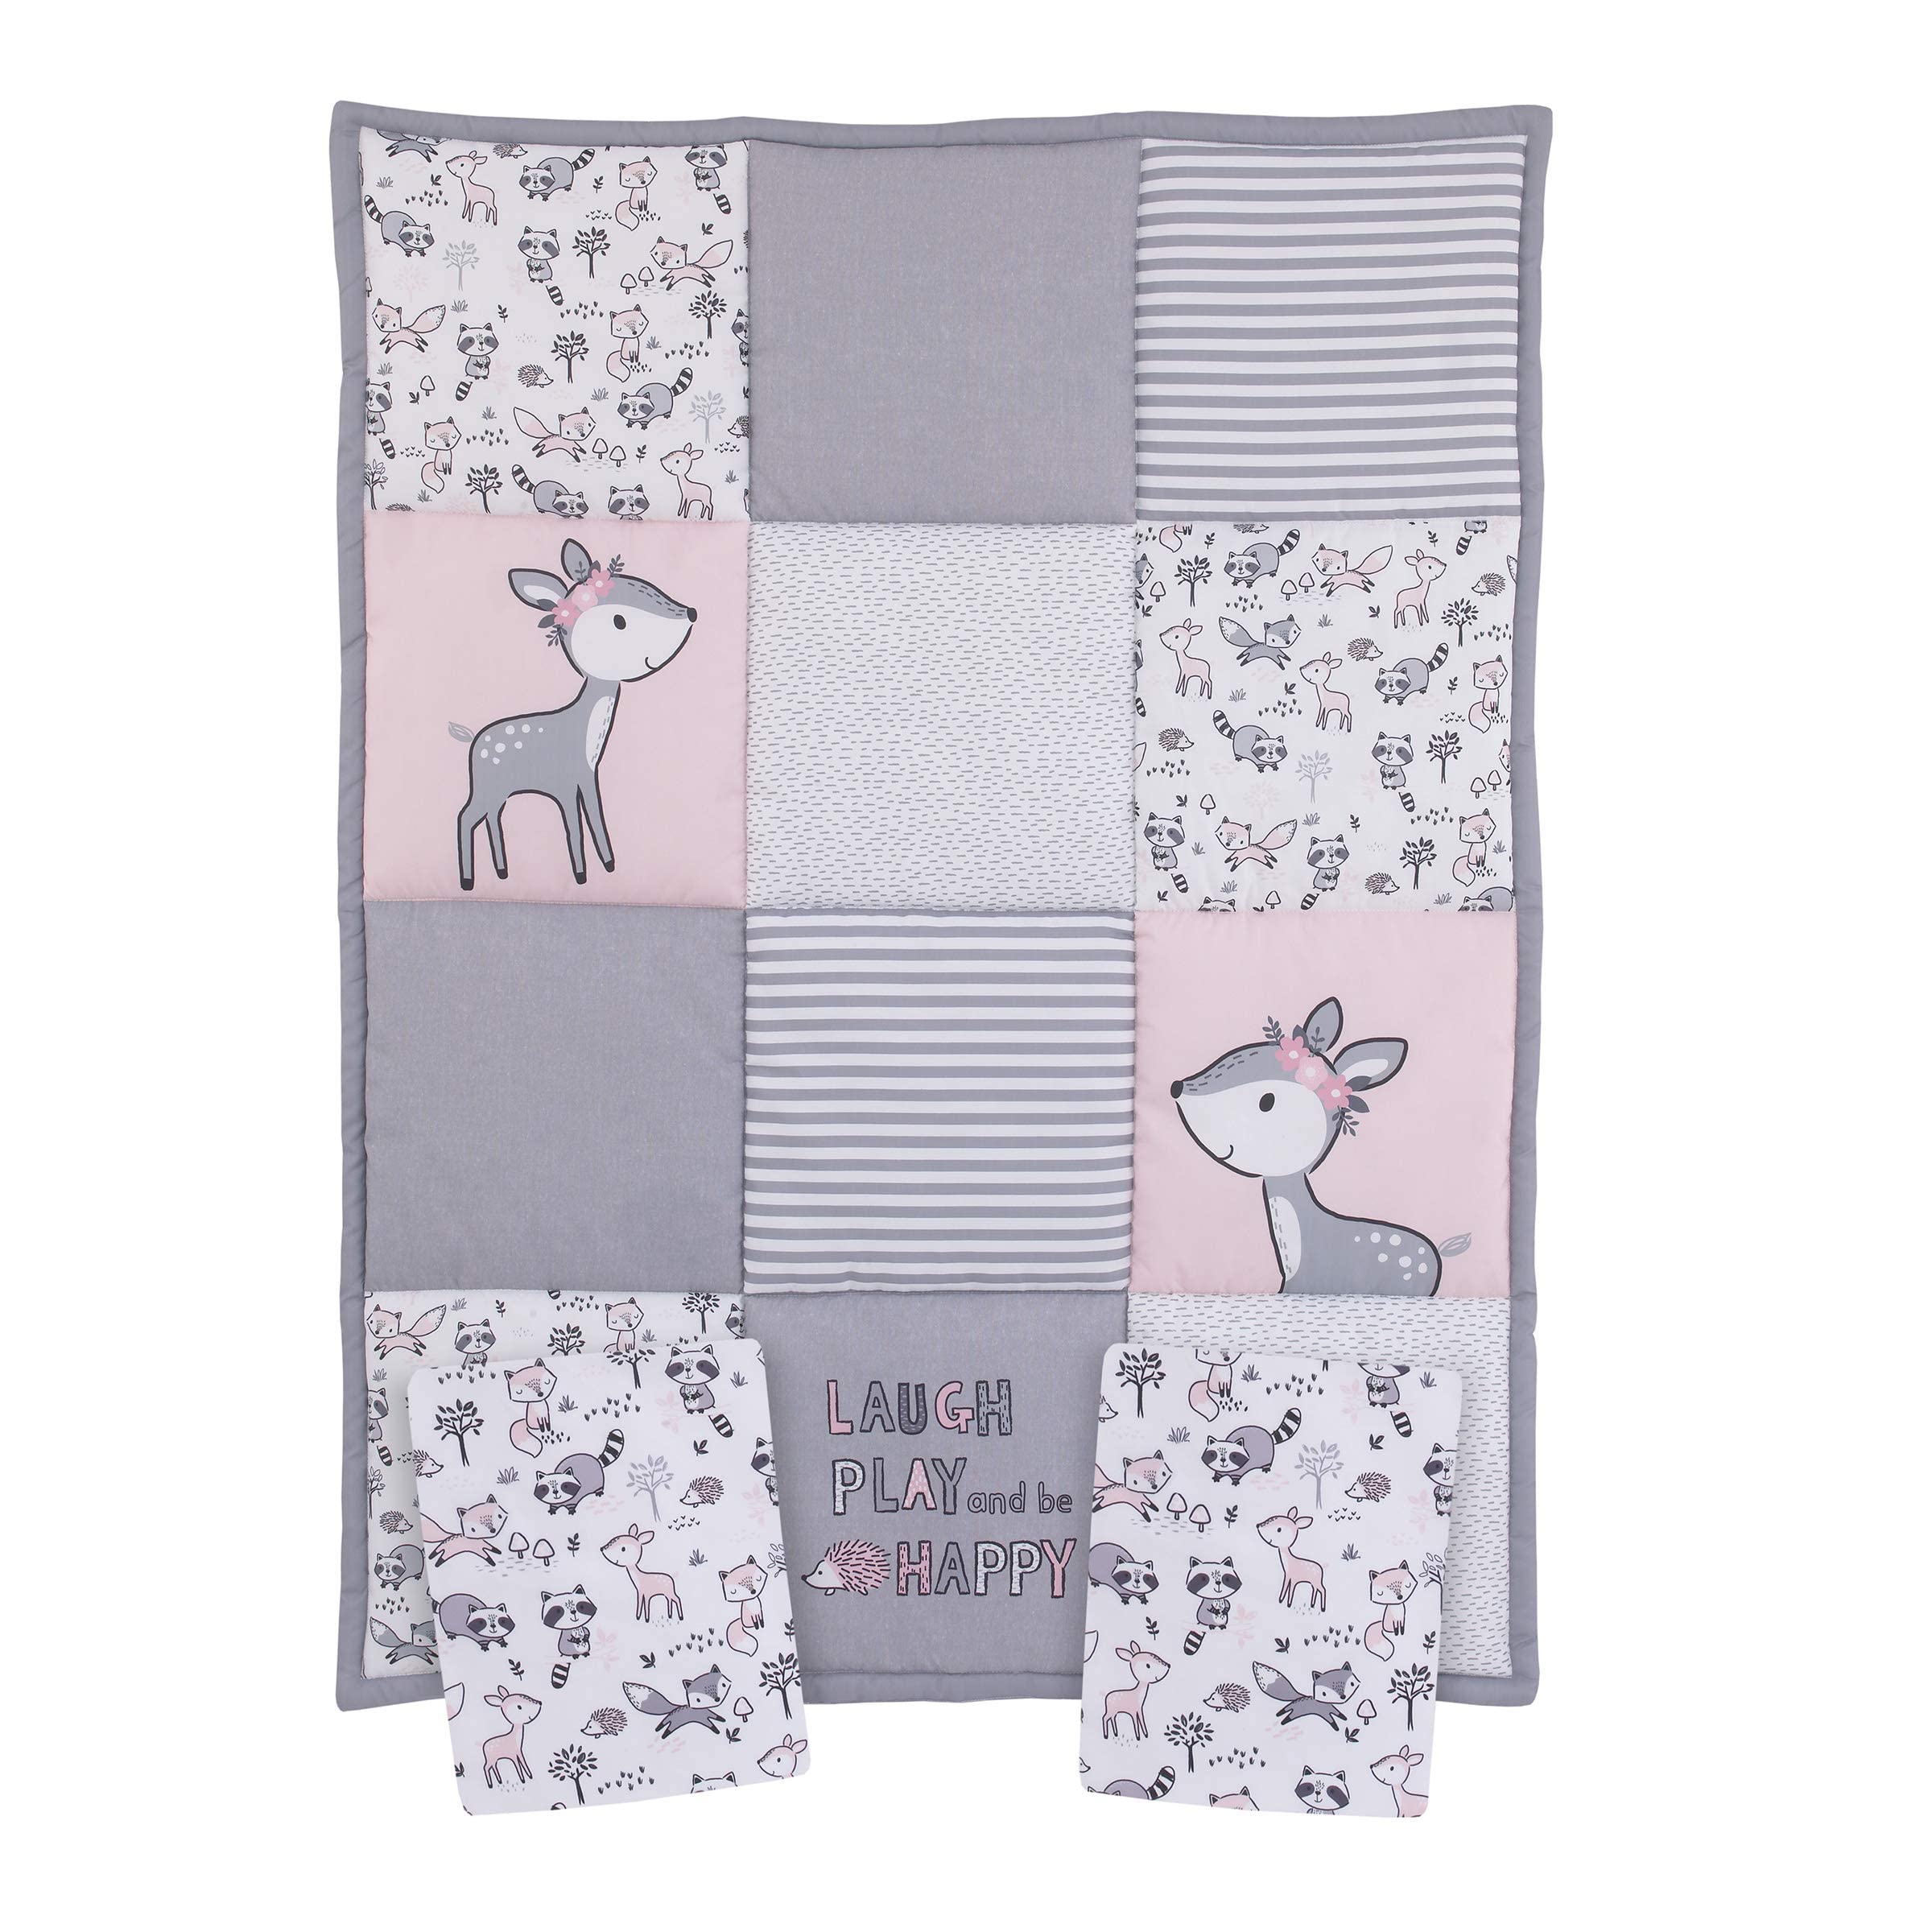 NoJo Little Love By Nojo Sweet Deer, grey, Pink, White 3Piece Nursery Mini crib Bedding Set With comforter, 2 Fitted Mini crib Sheets